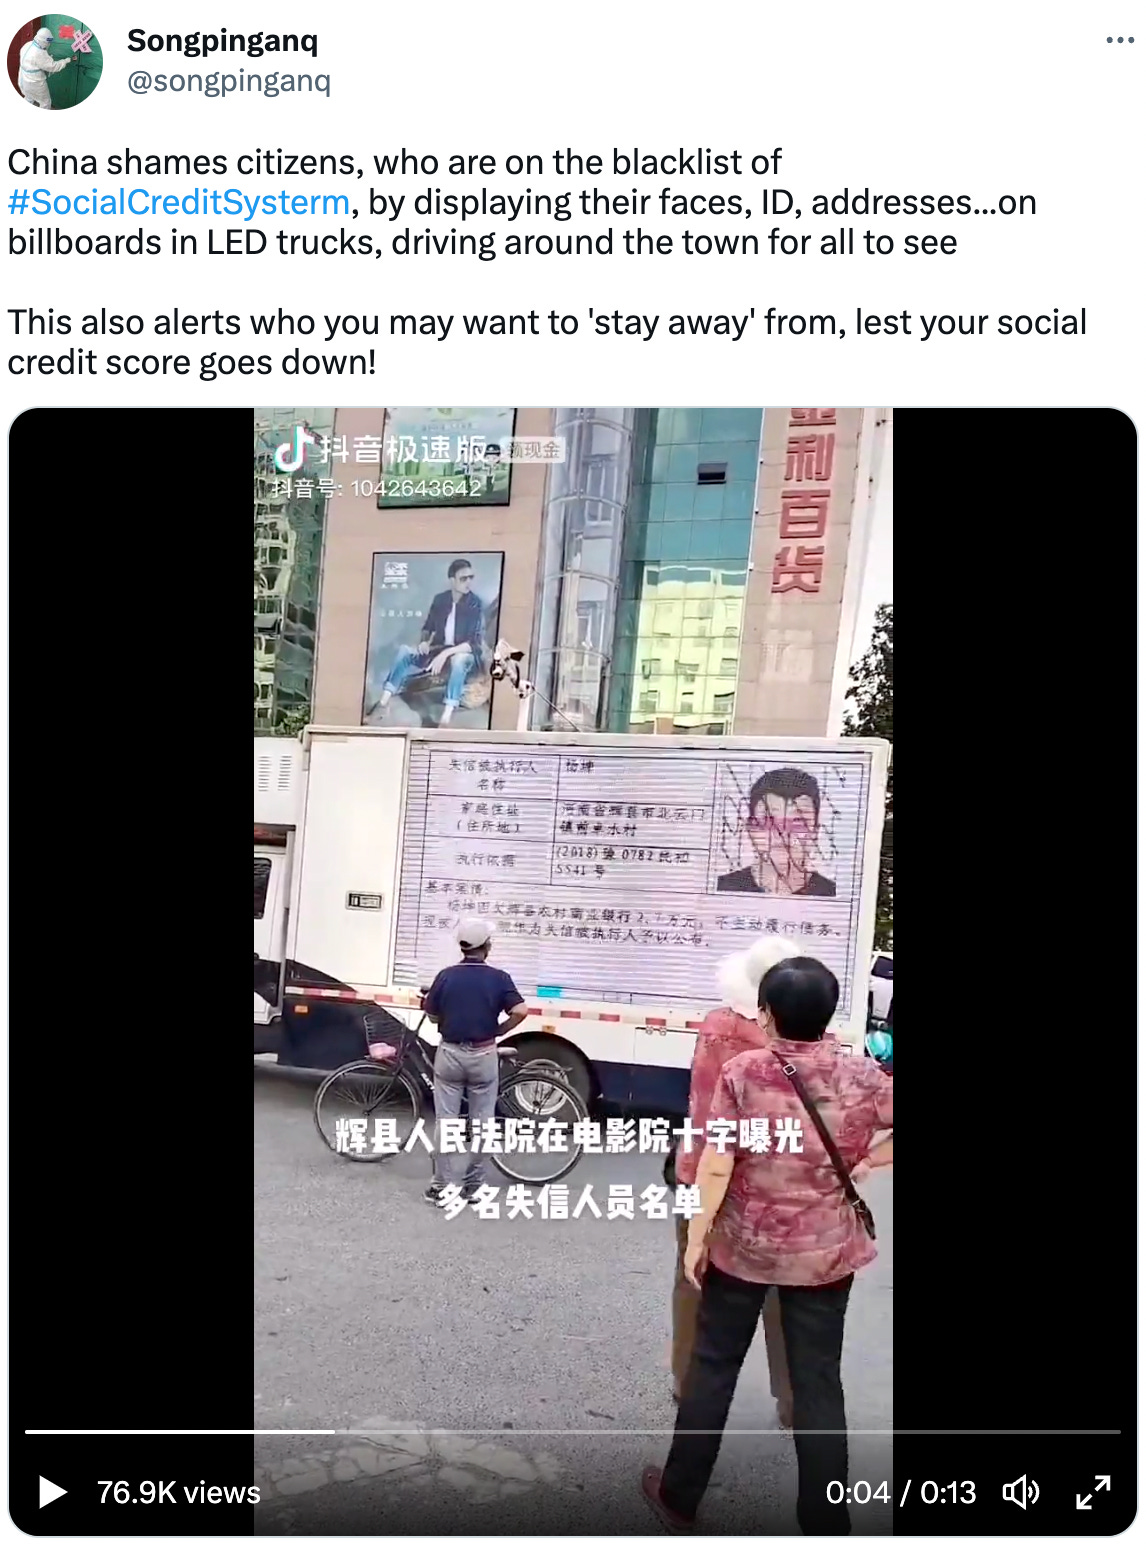  See new Tweets Conversation Songpinganq @songpinganq China shames citizens, who are on the blacklist of #SocialCreditSysterm, by displaying their faces, ID, addresses...on billboards in LED trucks, driving around the town for all to see  This also alerts who you may want to 'stay away' from, lest your social credit score goes down!